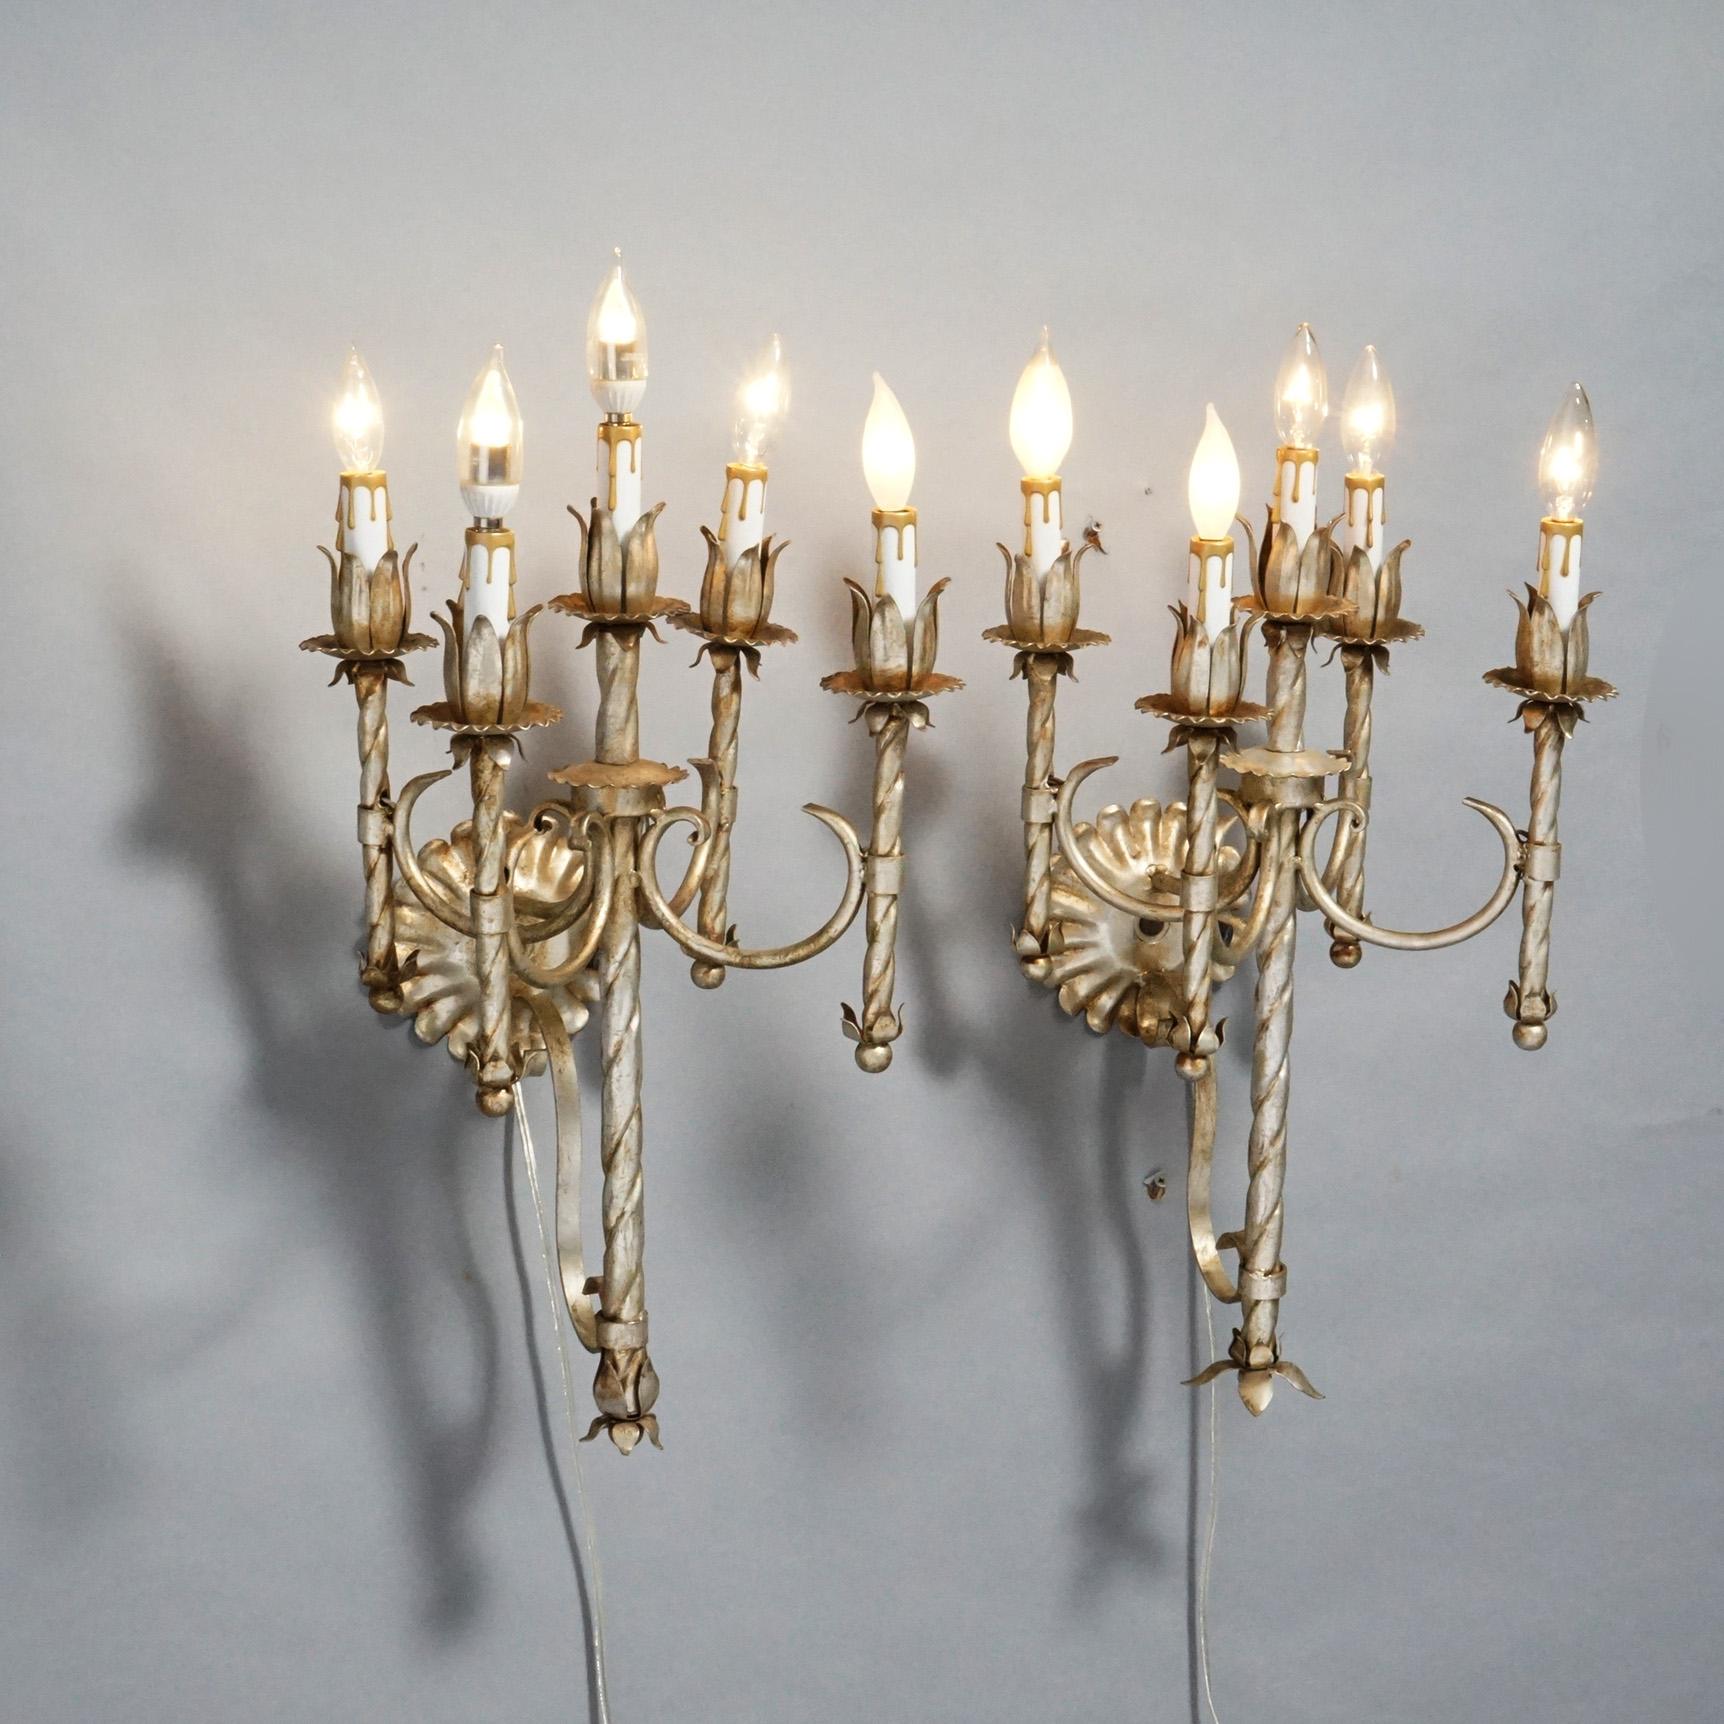 20th Century Antique Arts & Crafts Gothic Silvered Finish Candelabra Wall Sconces 20th C. For Sale